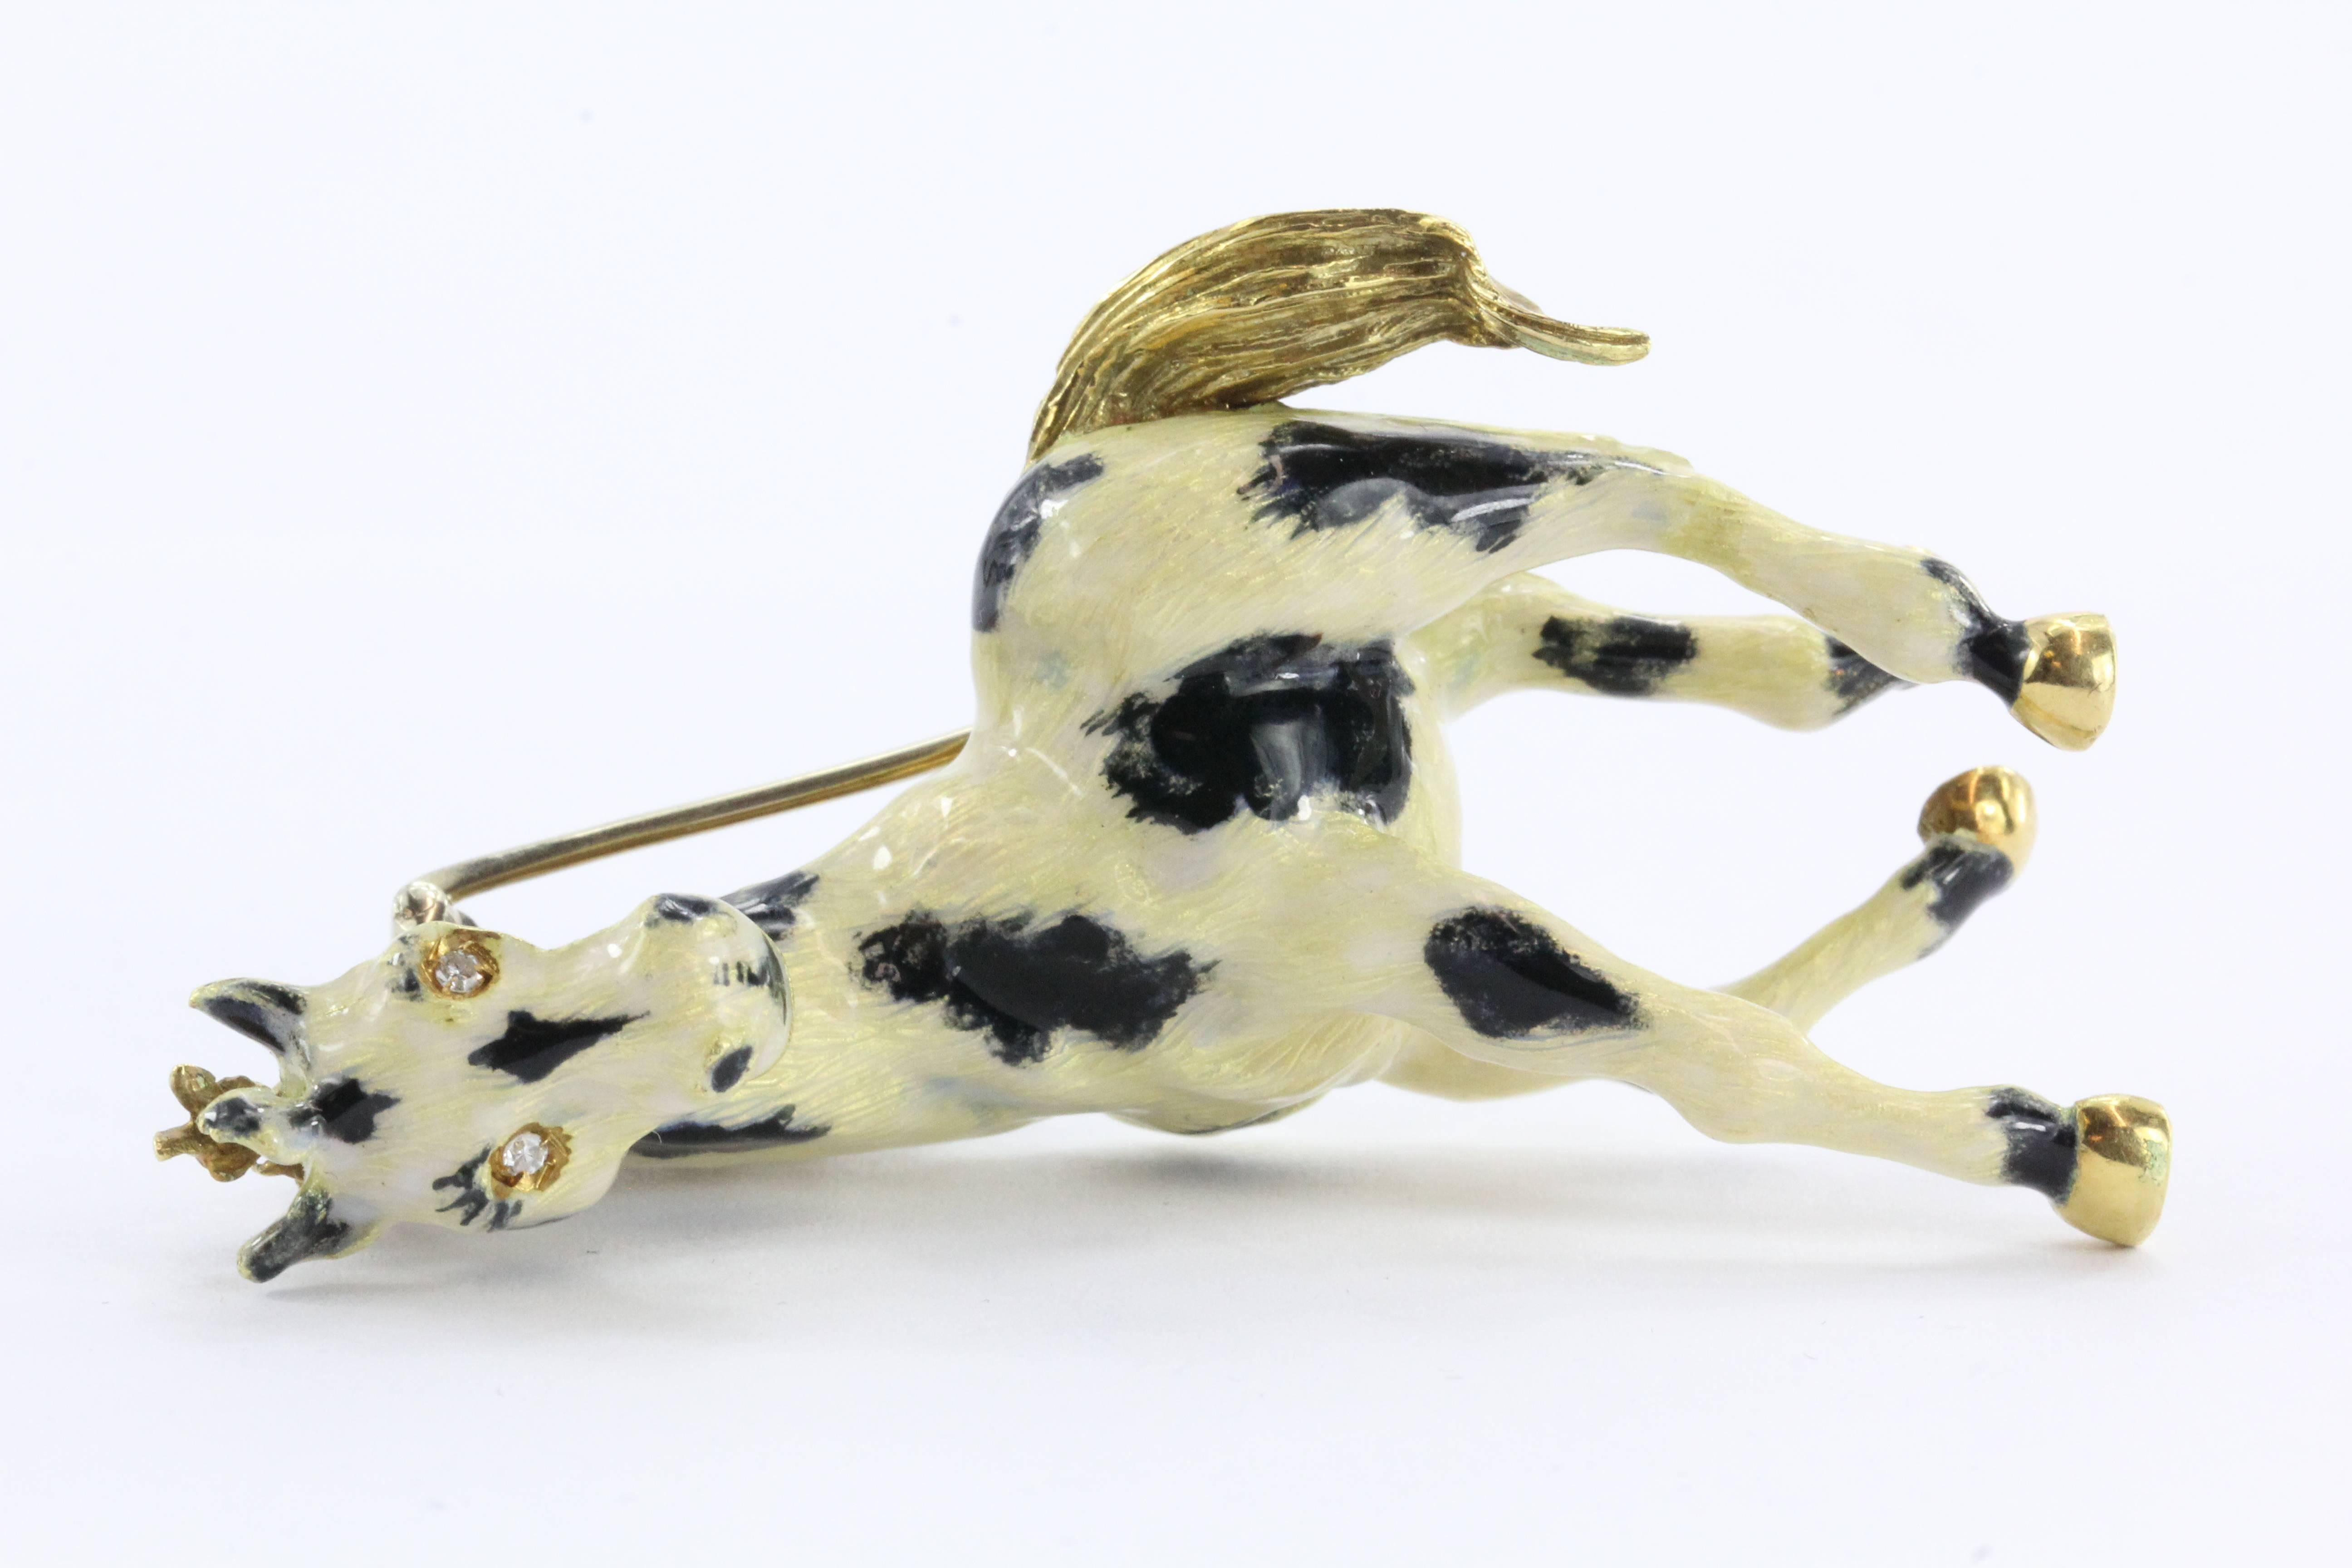 
This amazingly unique gold, diamond, and enamel paint horse brooch pin is a true work of art. The brooch features a gorgeous black and golden yellow horse crafted entirely of 18k yellow gold which has been ornamented with round single cut diamonds